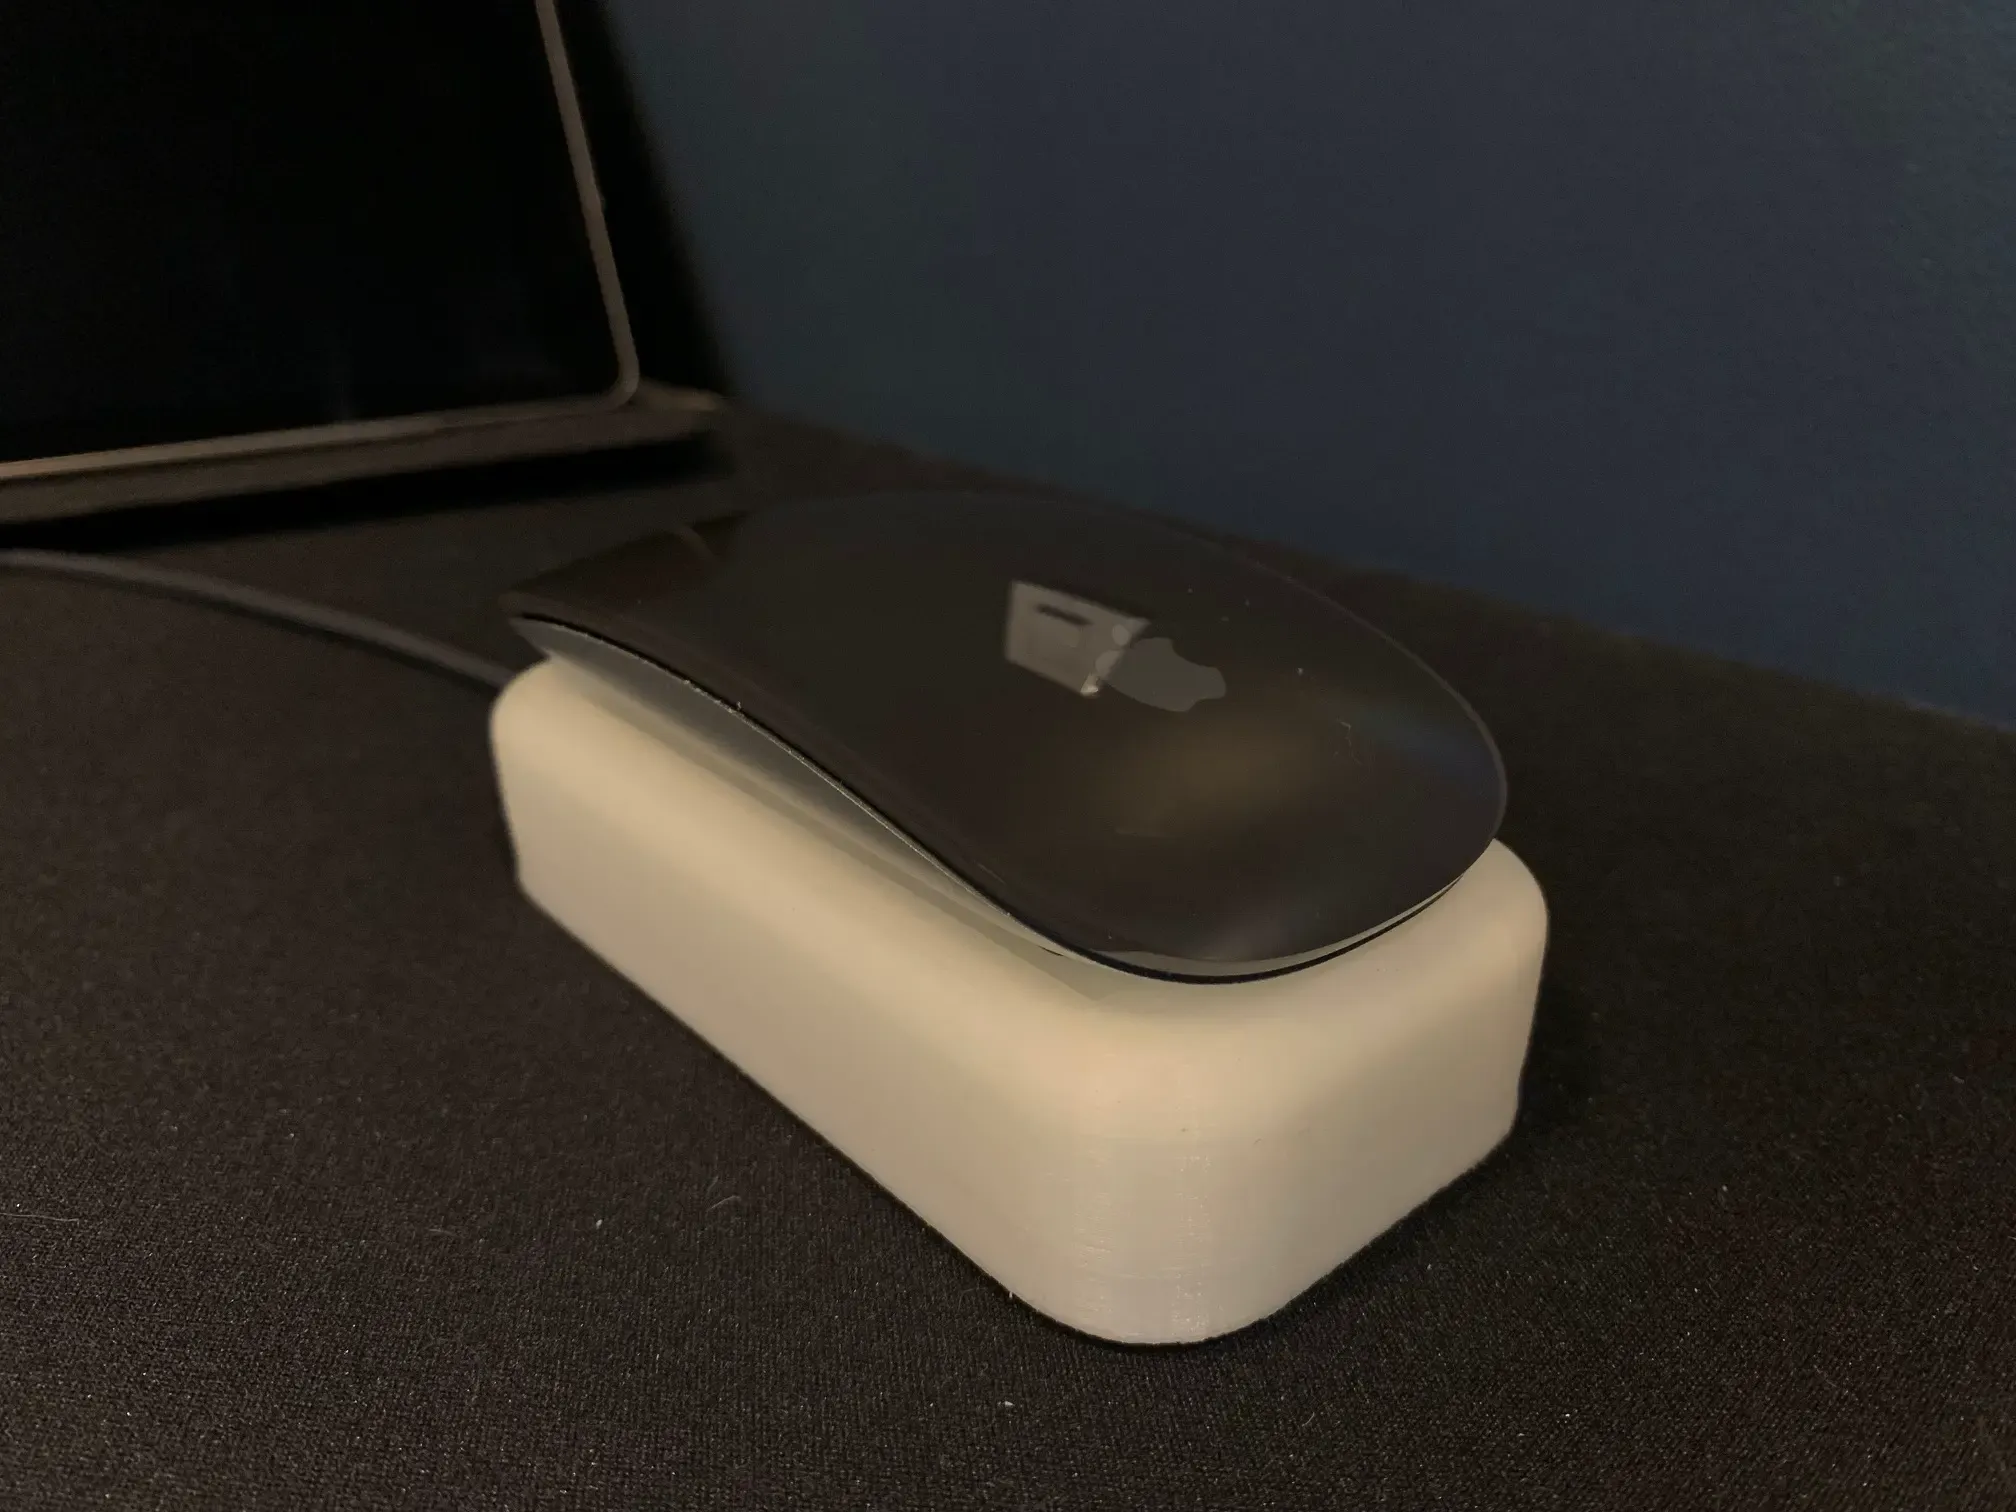 Magic mouse stand